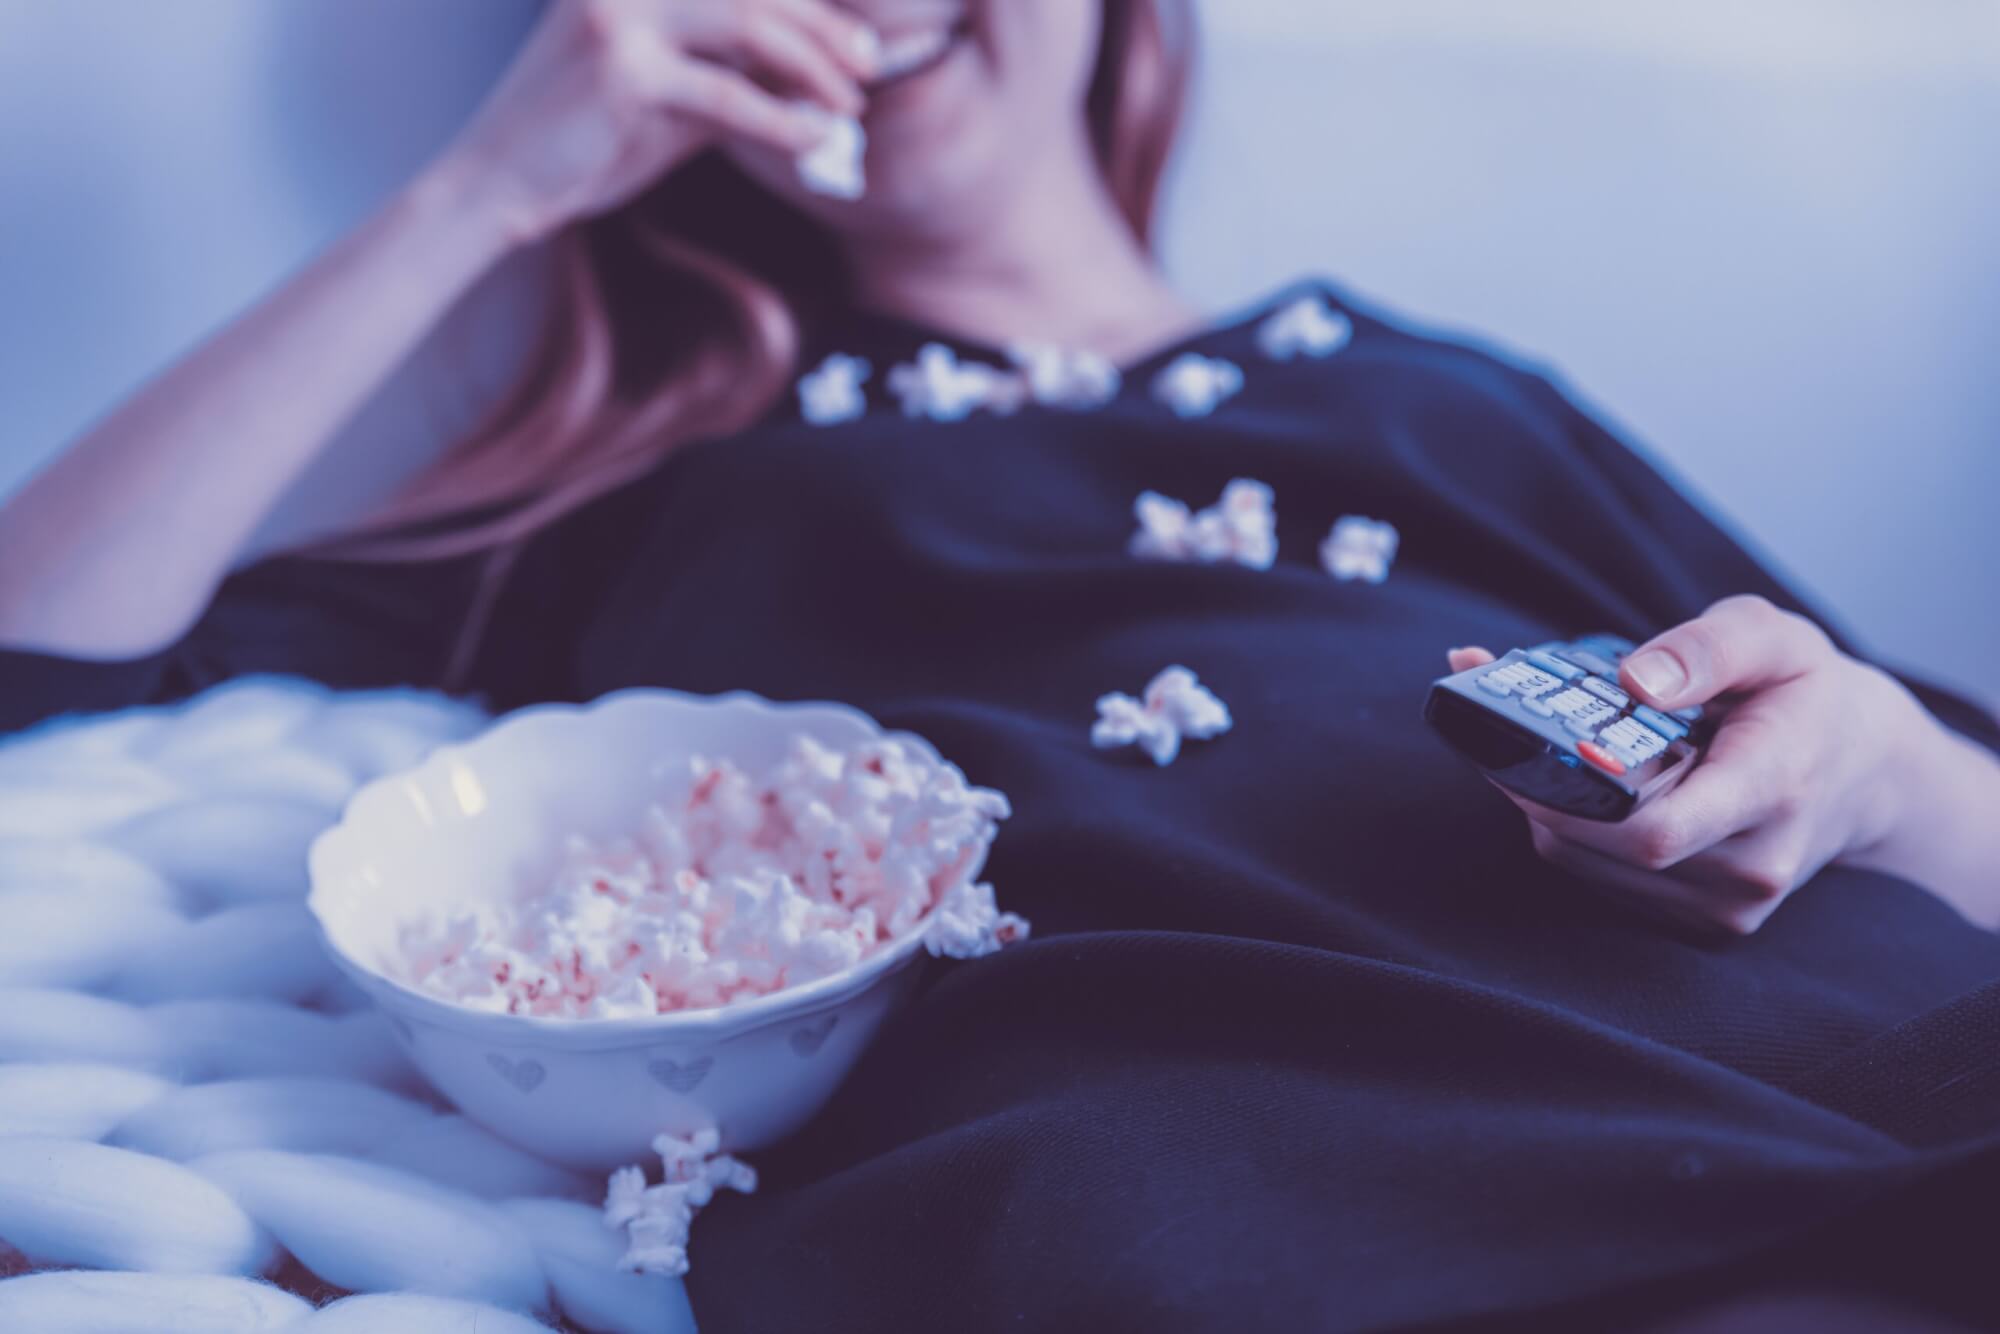 Image from Unsplash of someone watching a movie